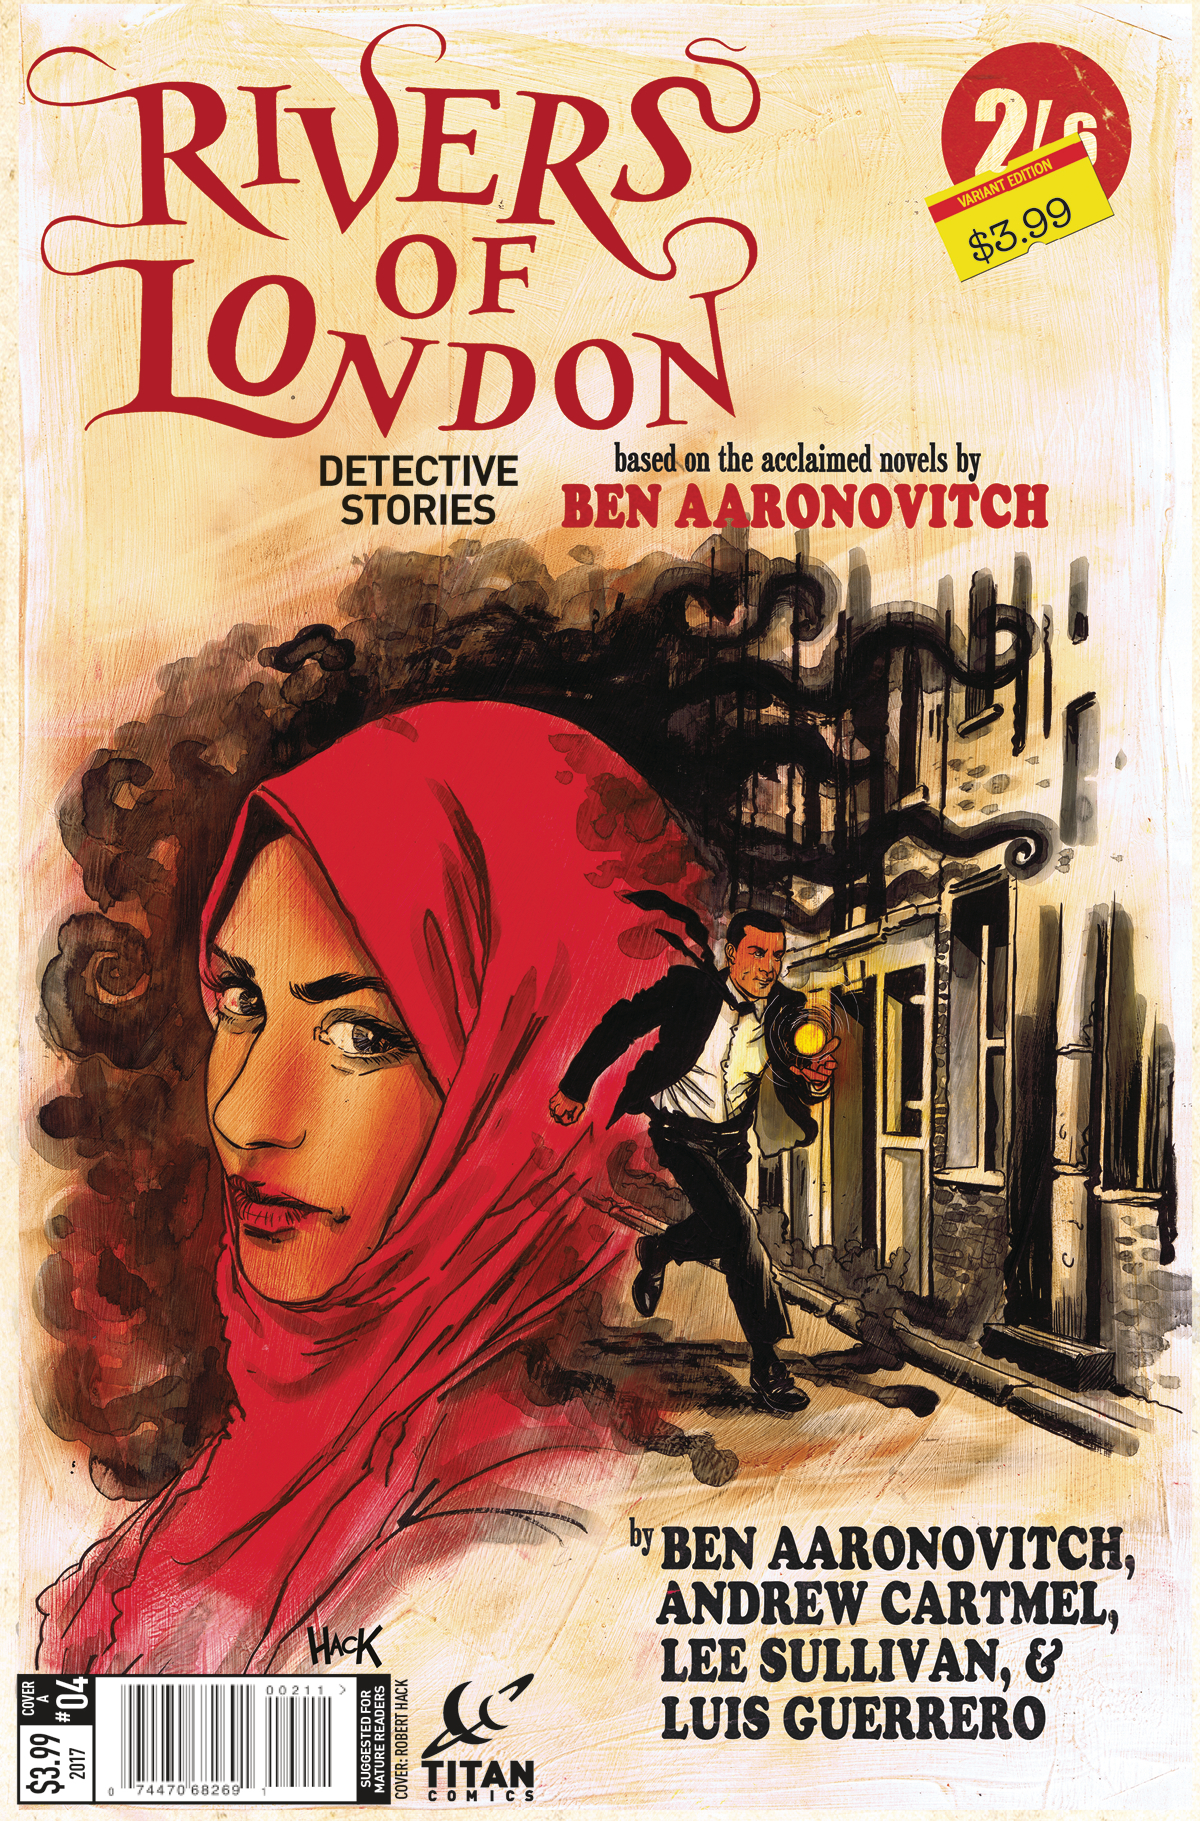 RIVERS OF LONDON DETECTIVE STORIES #4 (OF 4)